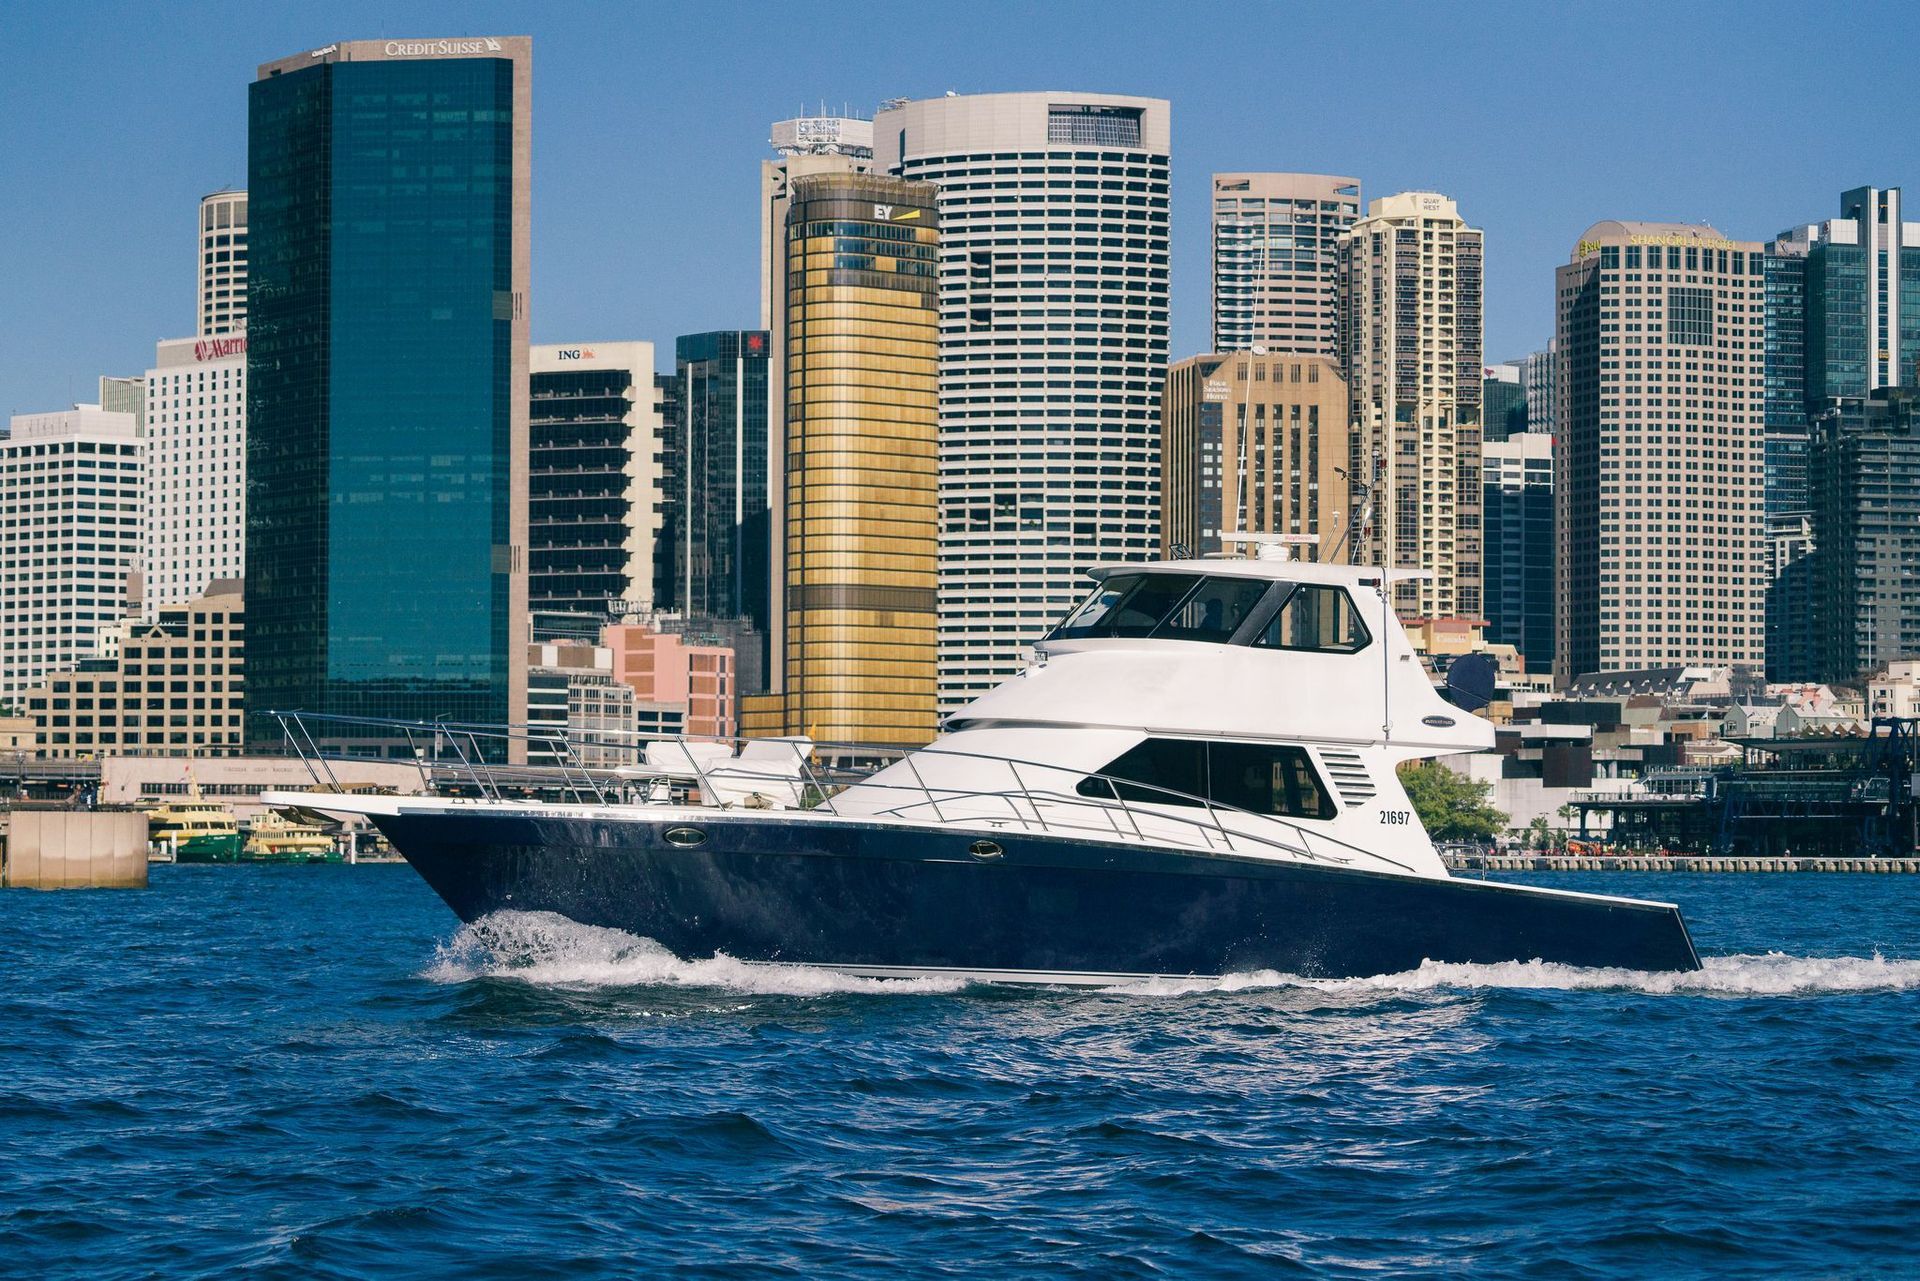 STATE OF THE ART | From $850 Per Hour | 40 Guests